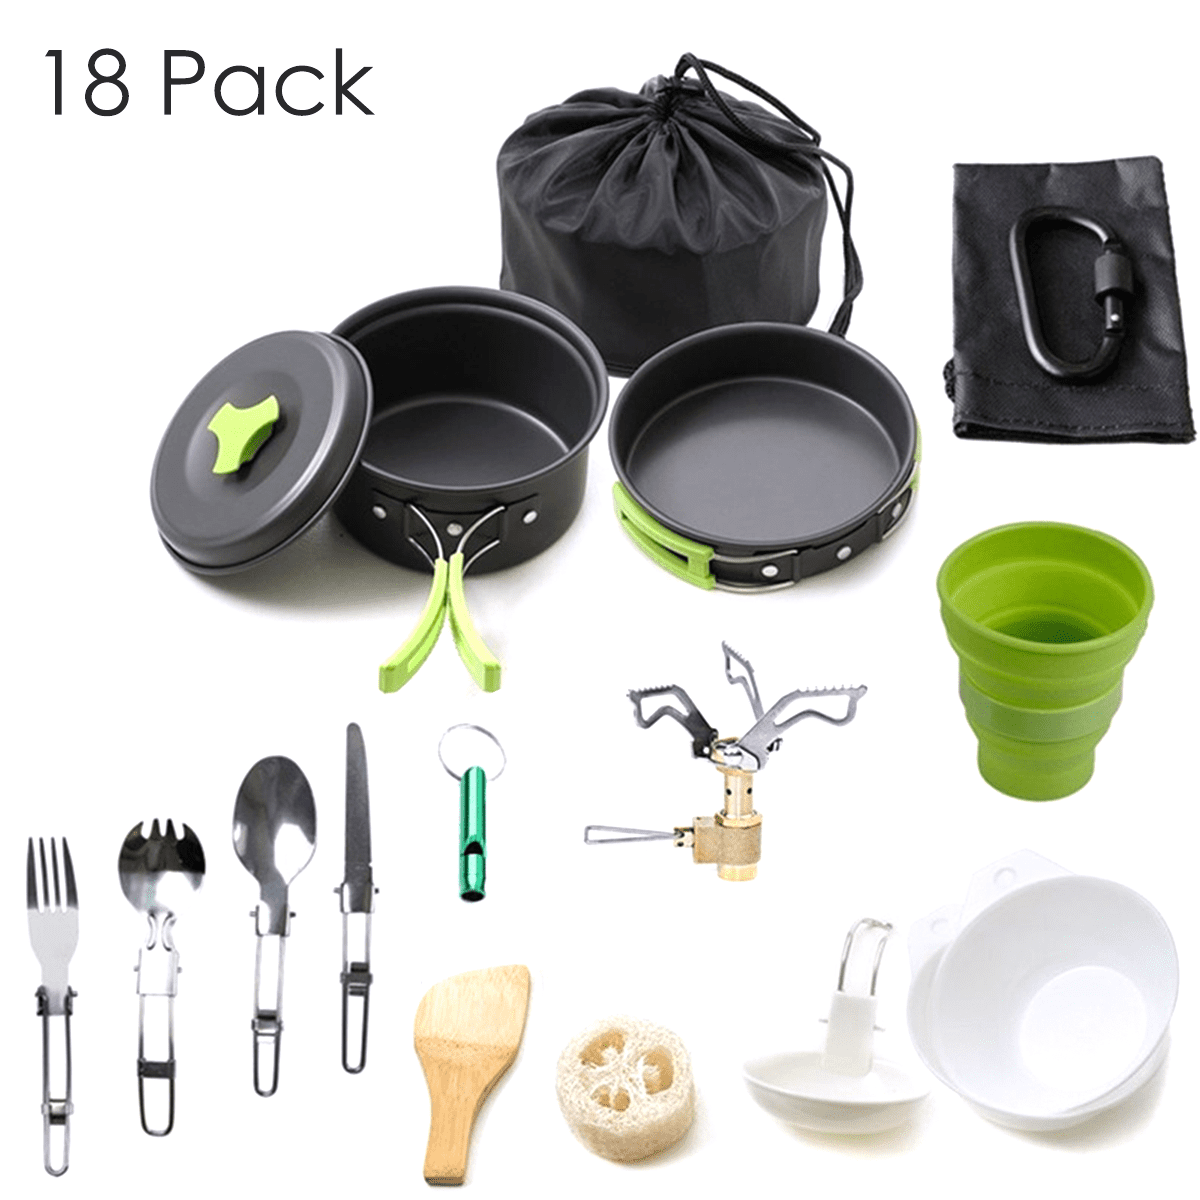 PAN & POTS & BOWLS SET FOR 2 TO 3 PEOPLE NON STICK OUTDOOR CAMPING COOKWARE KIT 